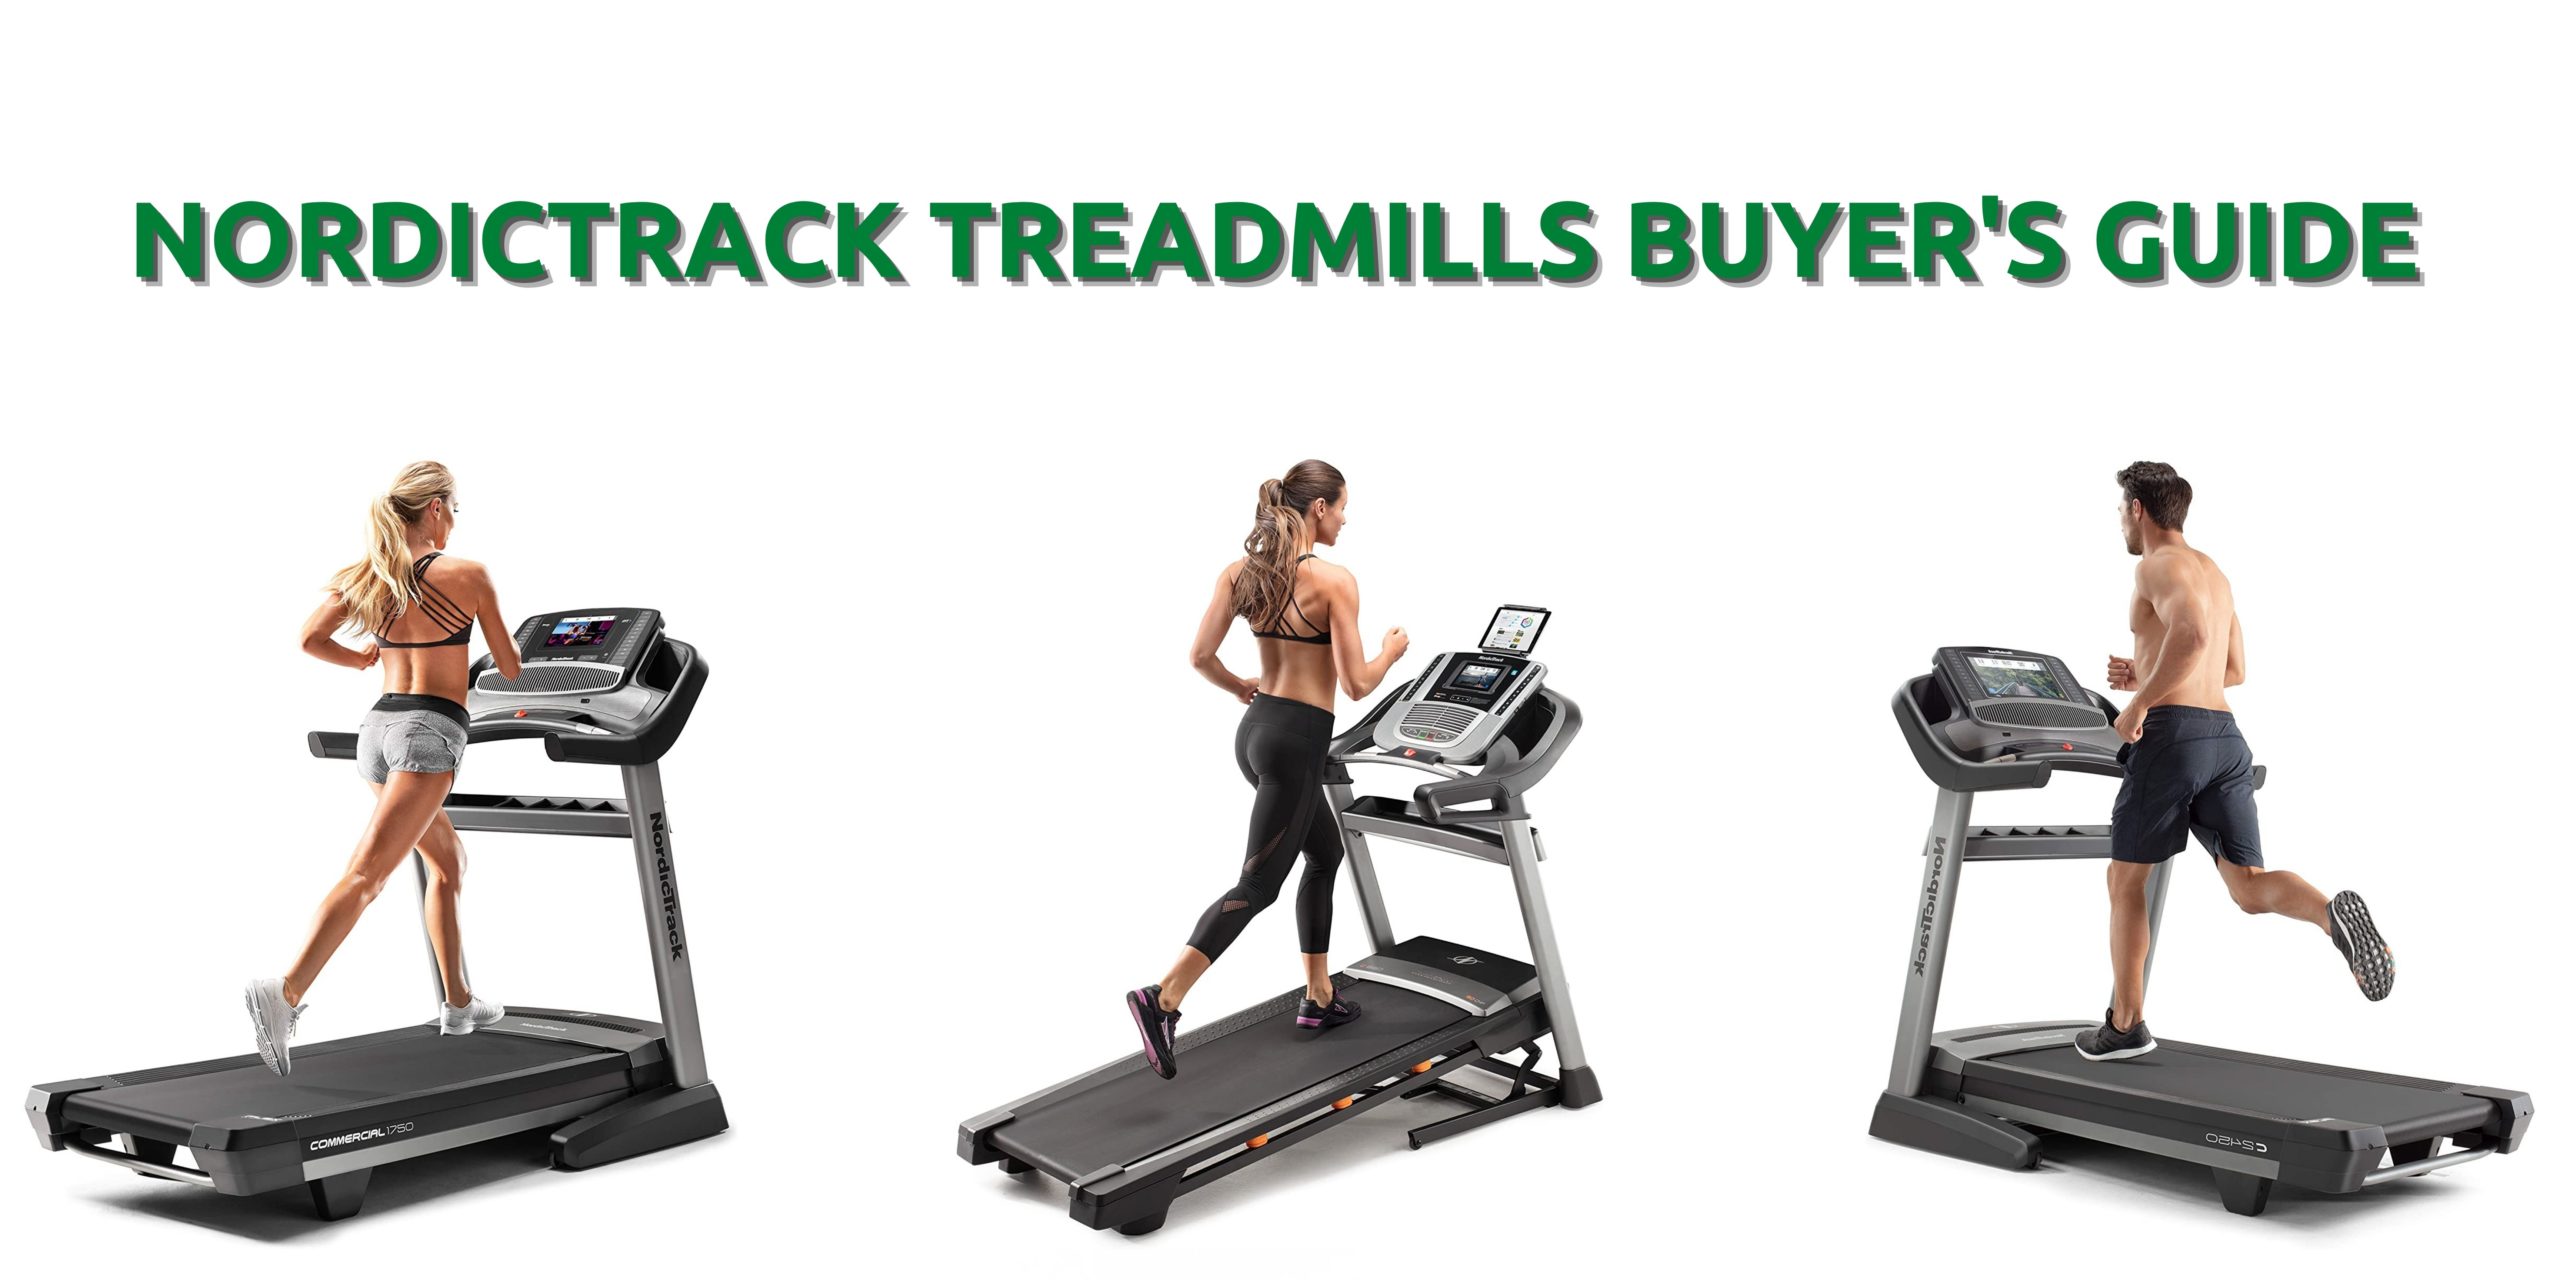 NordicTrack Treadmills Buyers Guide scaled